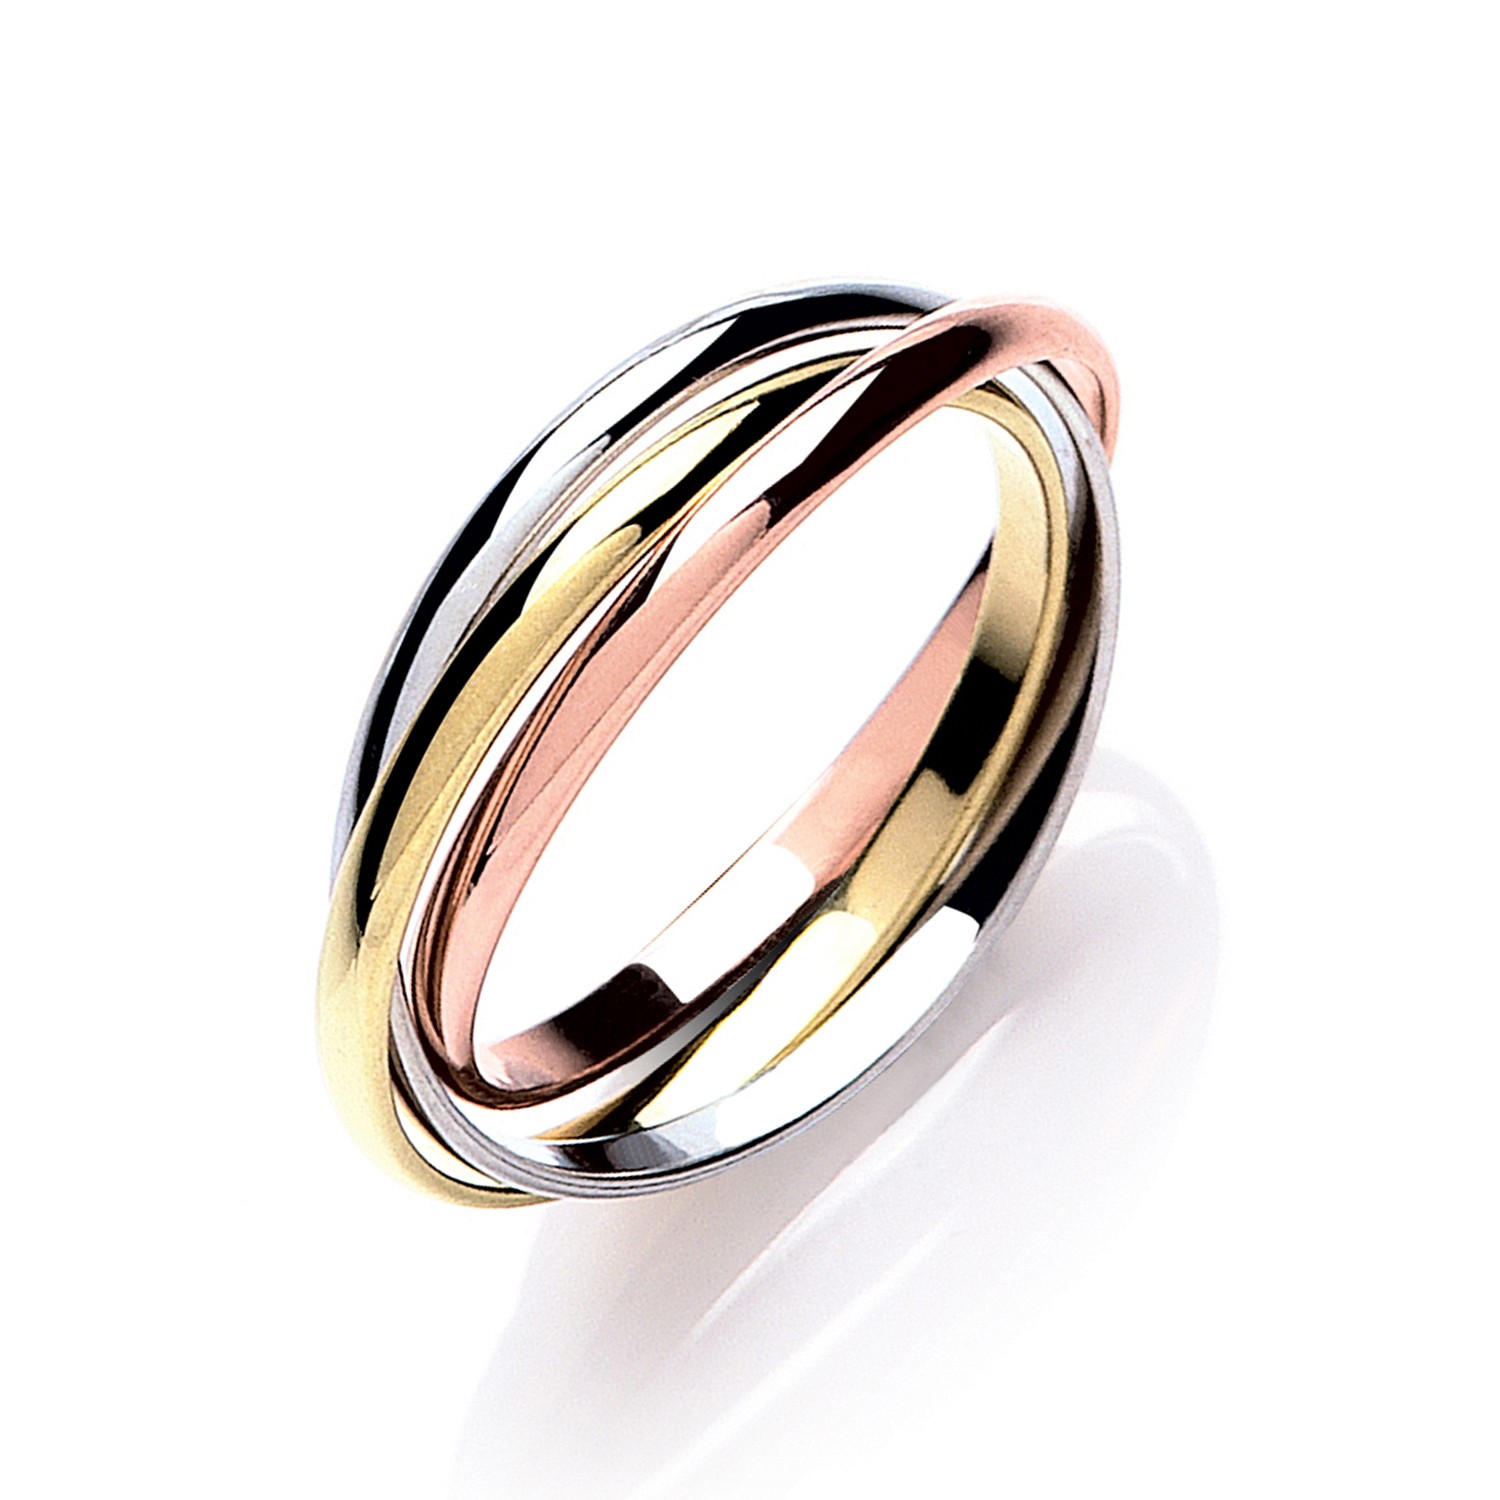 9ct Mixed Gold 2mm Russian Wedding Ring | Jewellerybox.co.uk